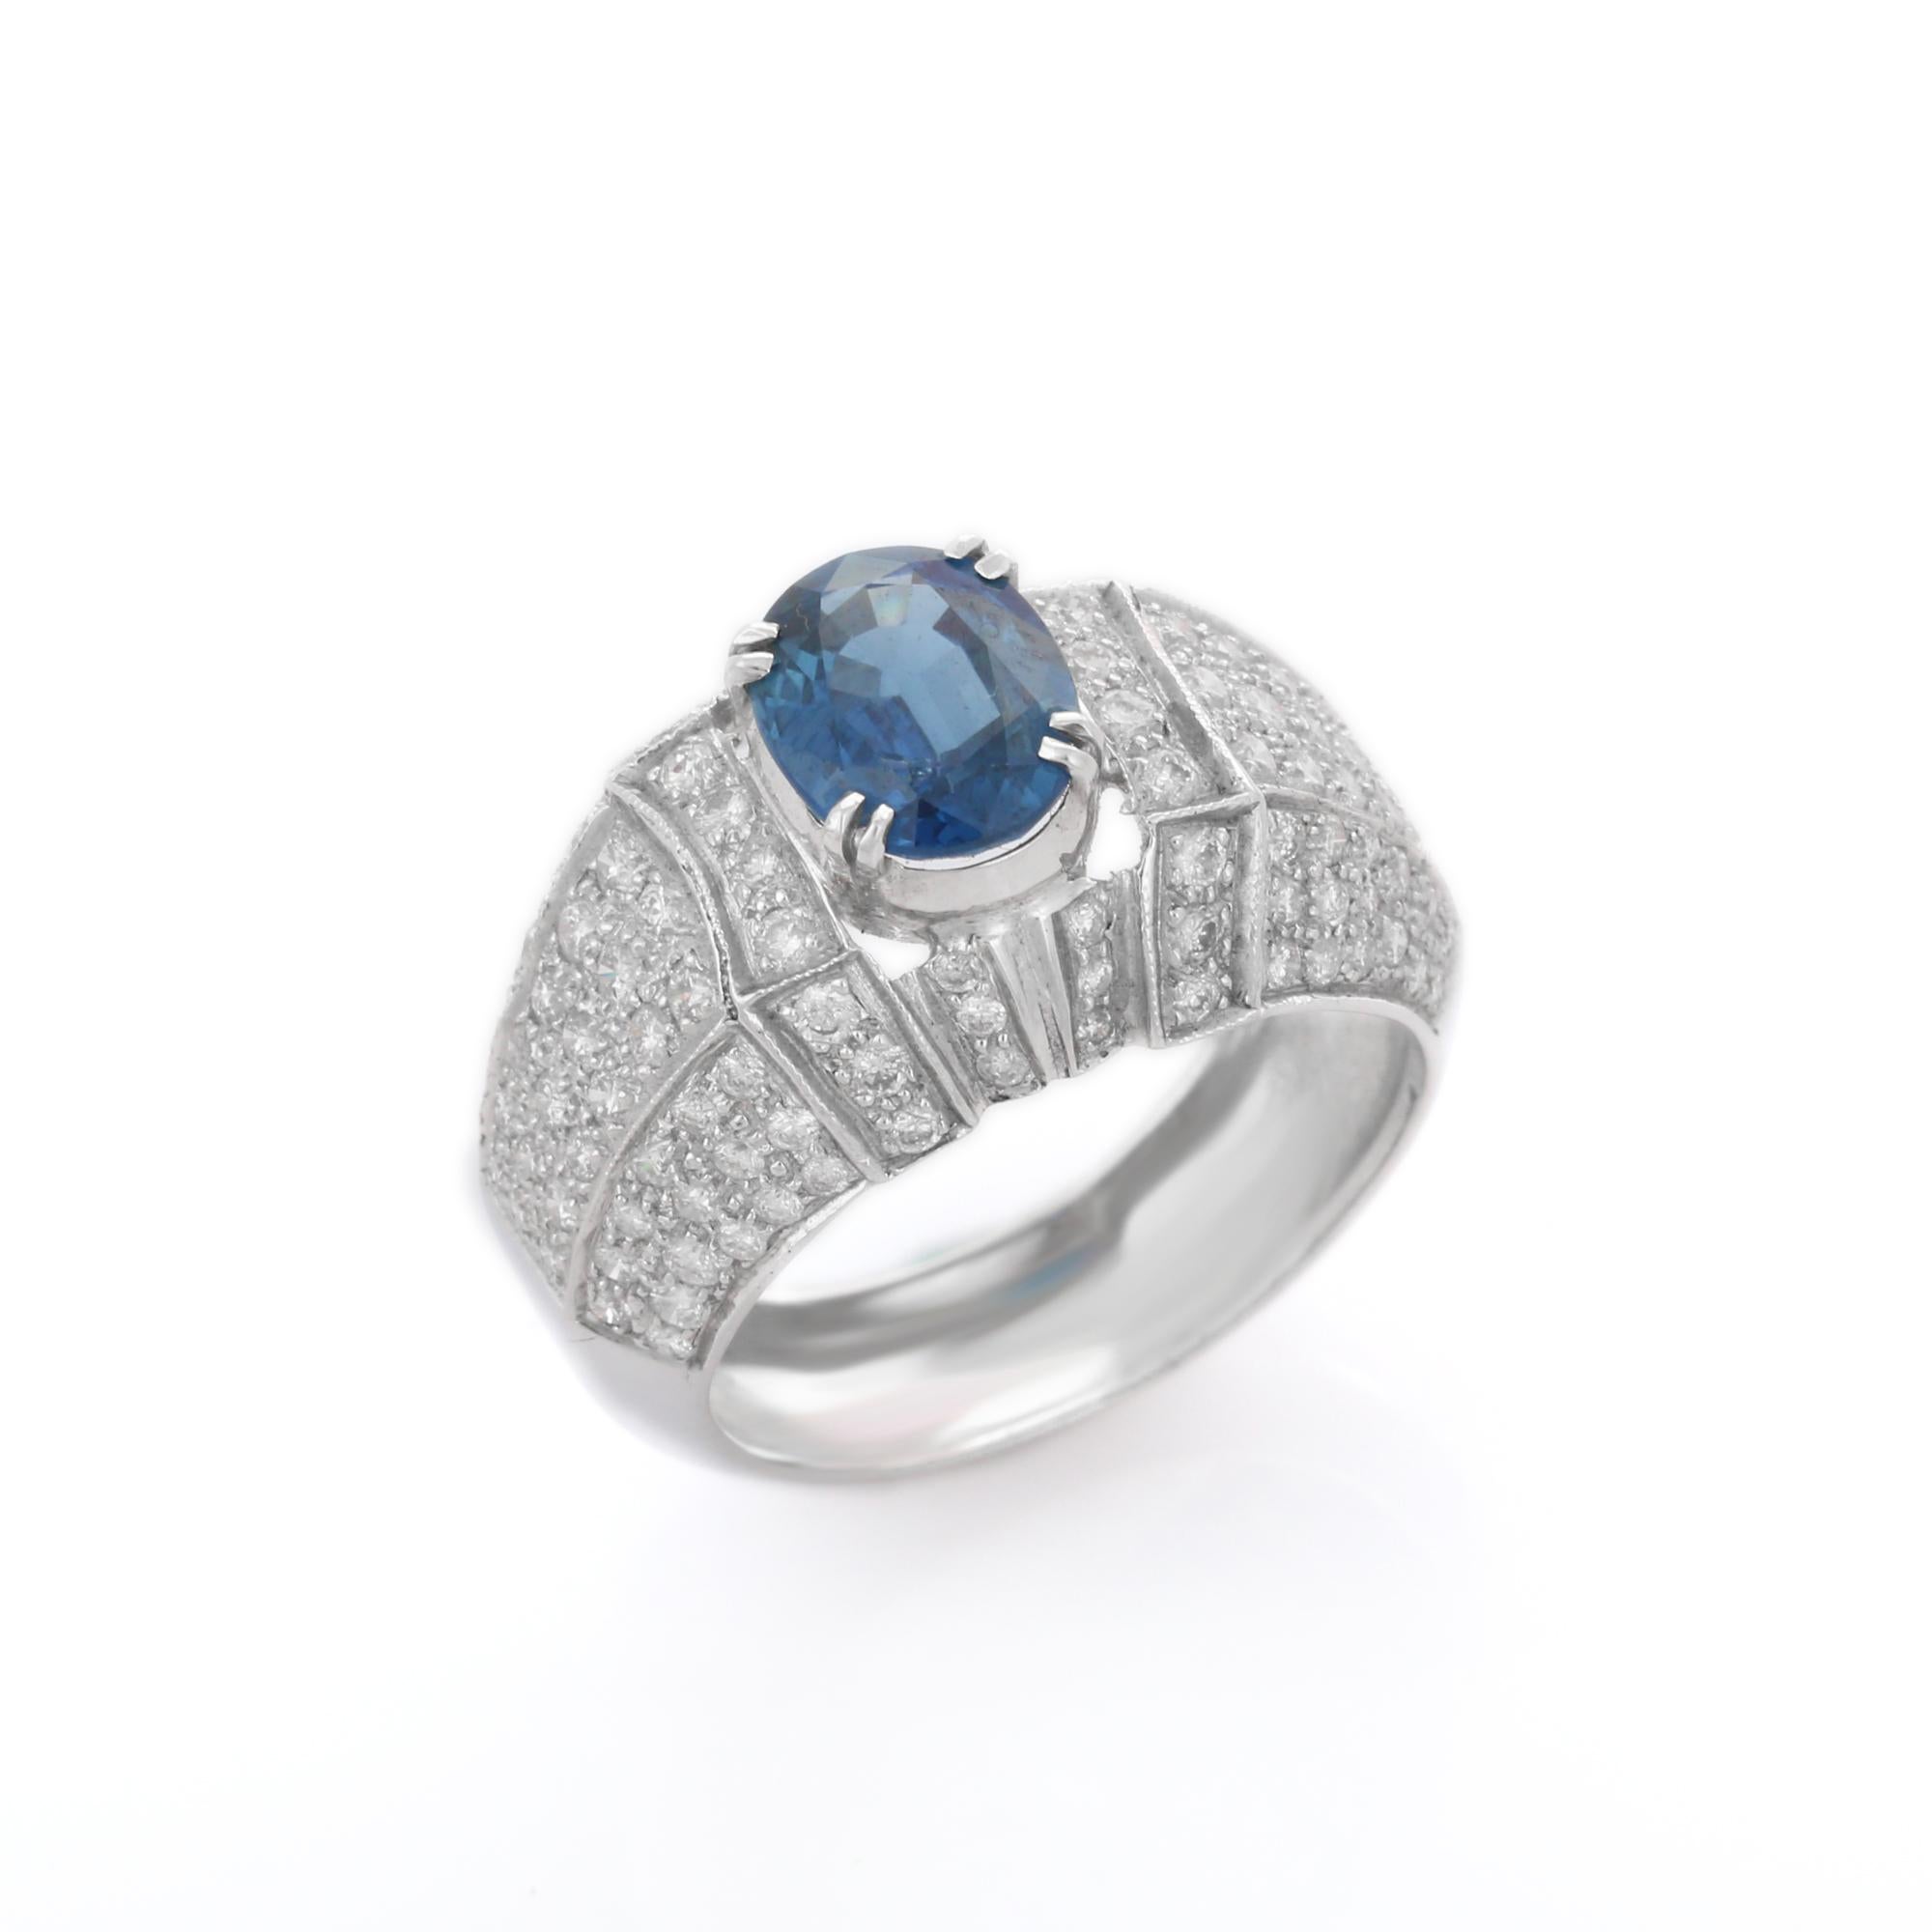 For Sale:  Diamond and Blue Sapphire Bold Engagement Ring in 18K Solid White Gold 5